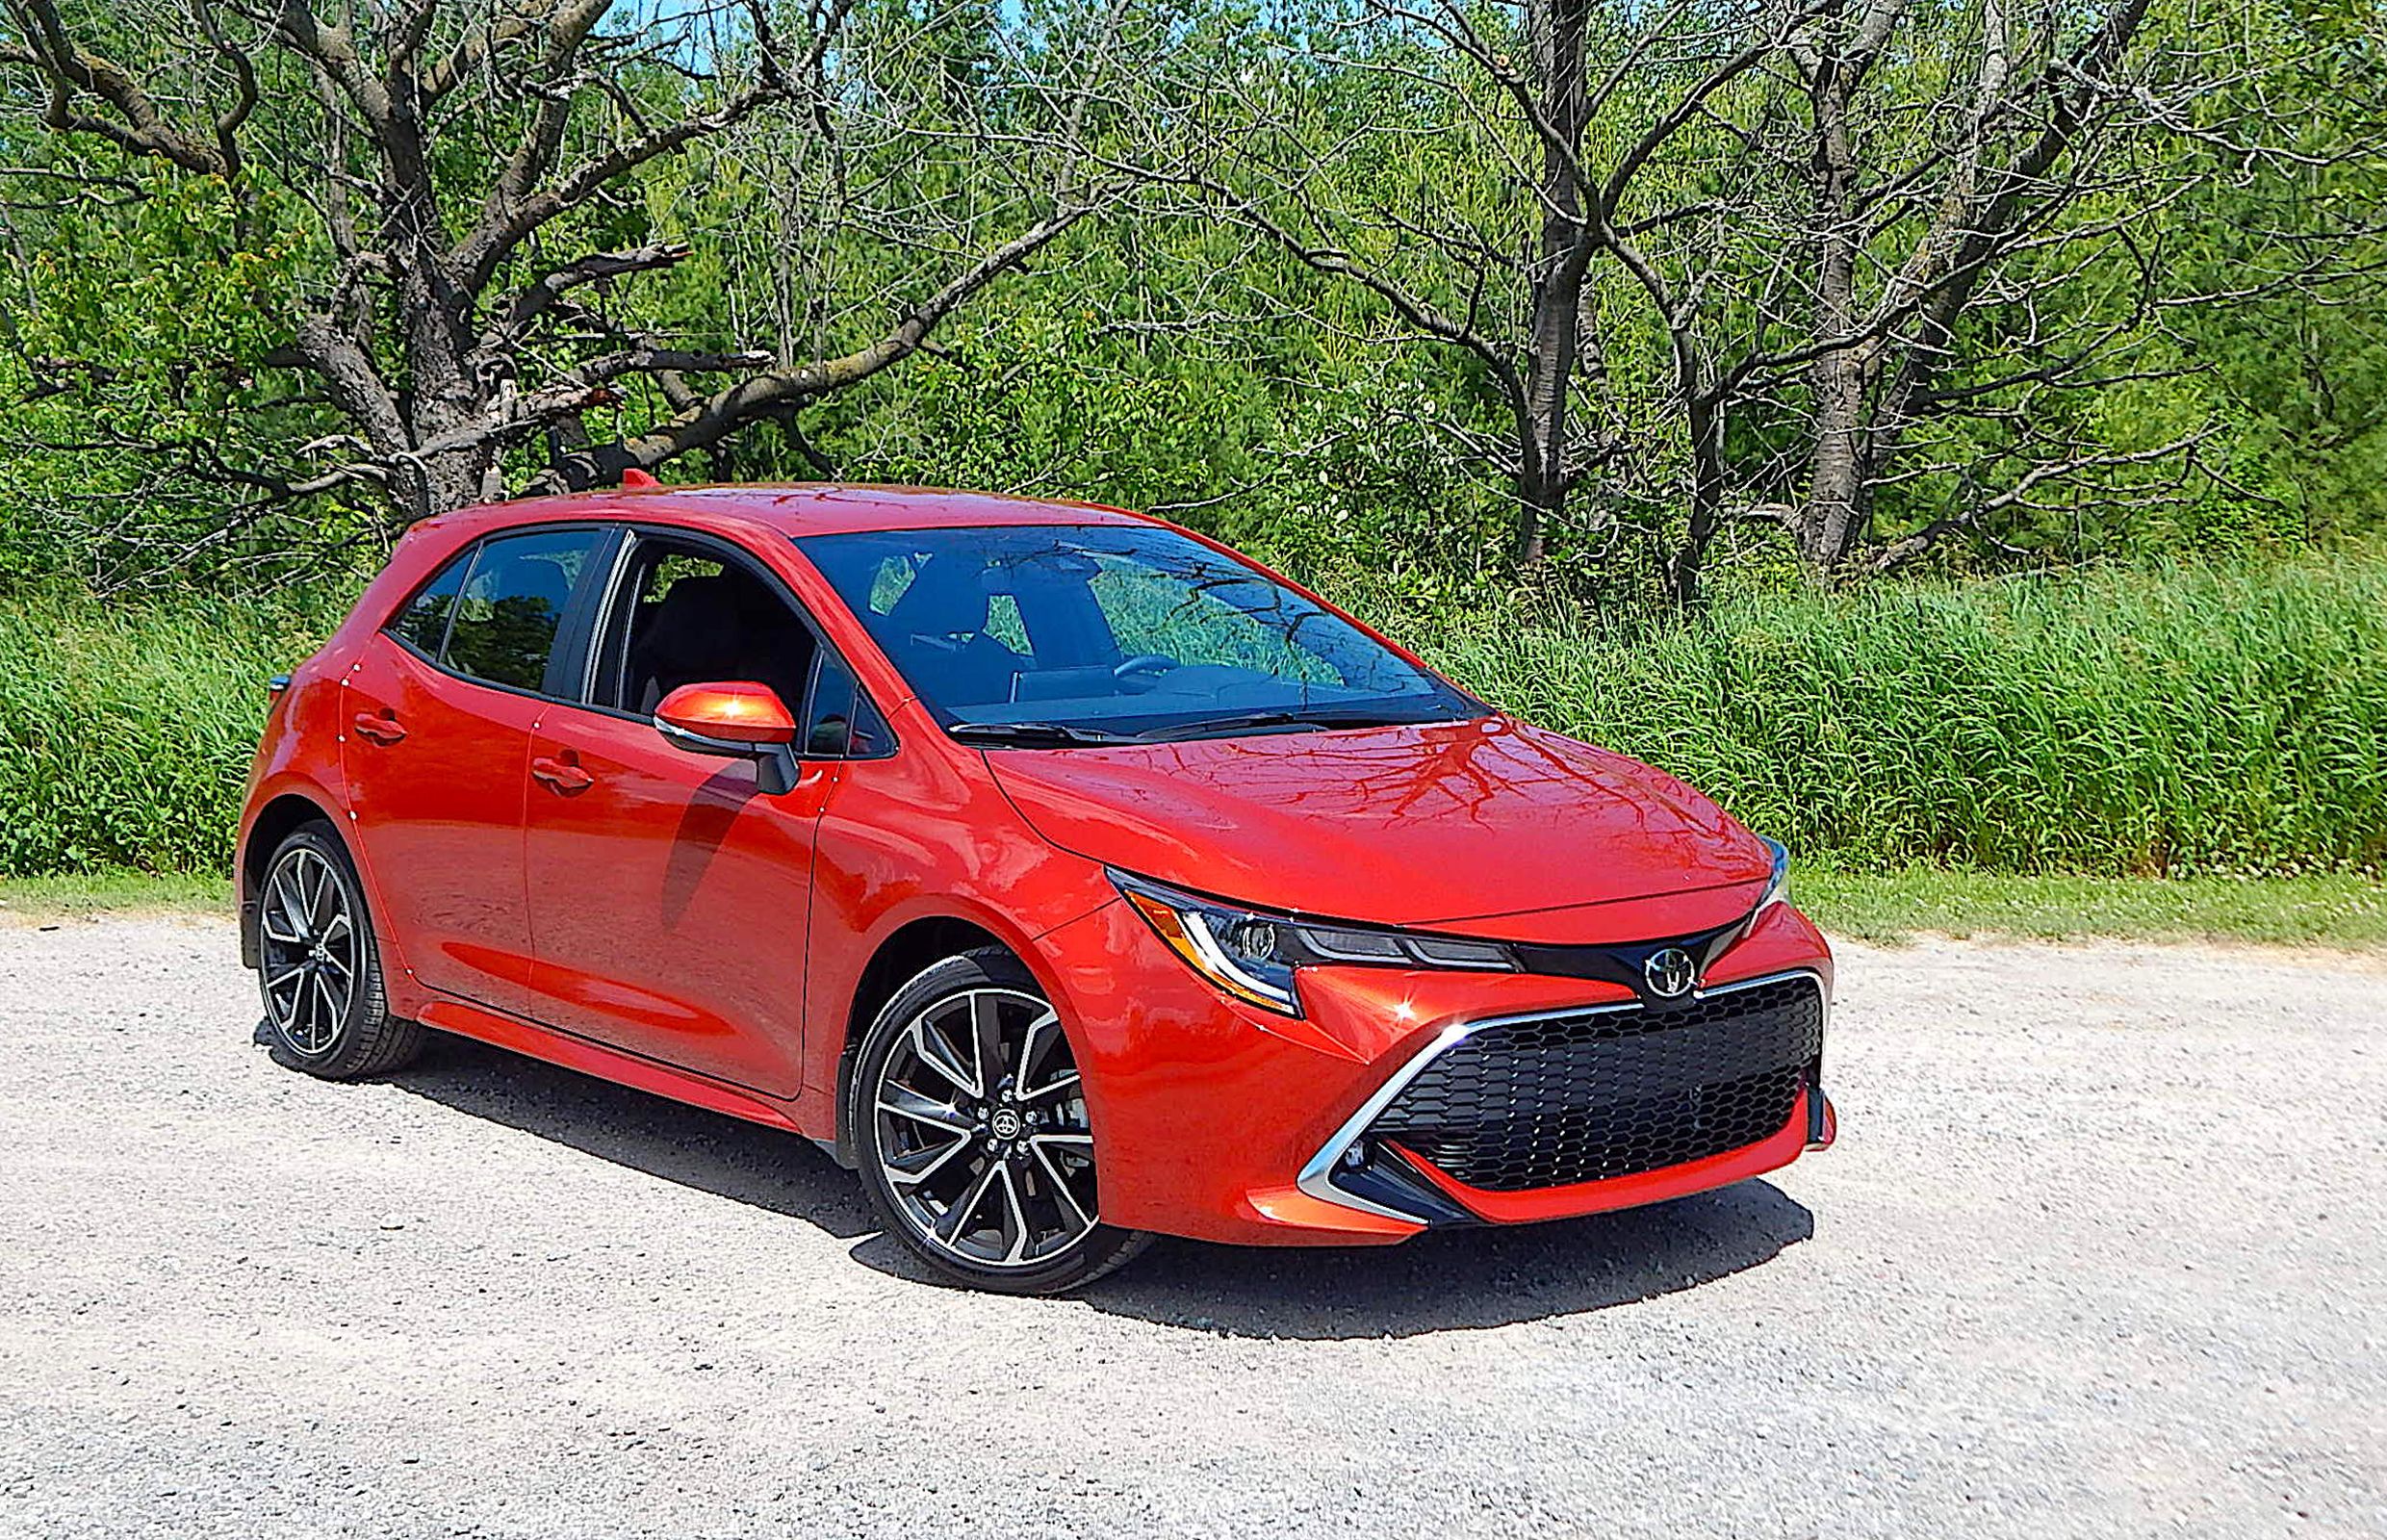 The all-new 2019 Toyota Corolla Hatchback in Montreal